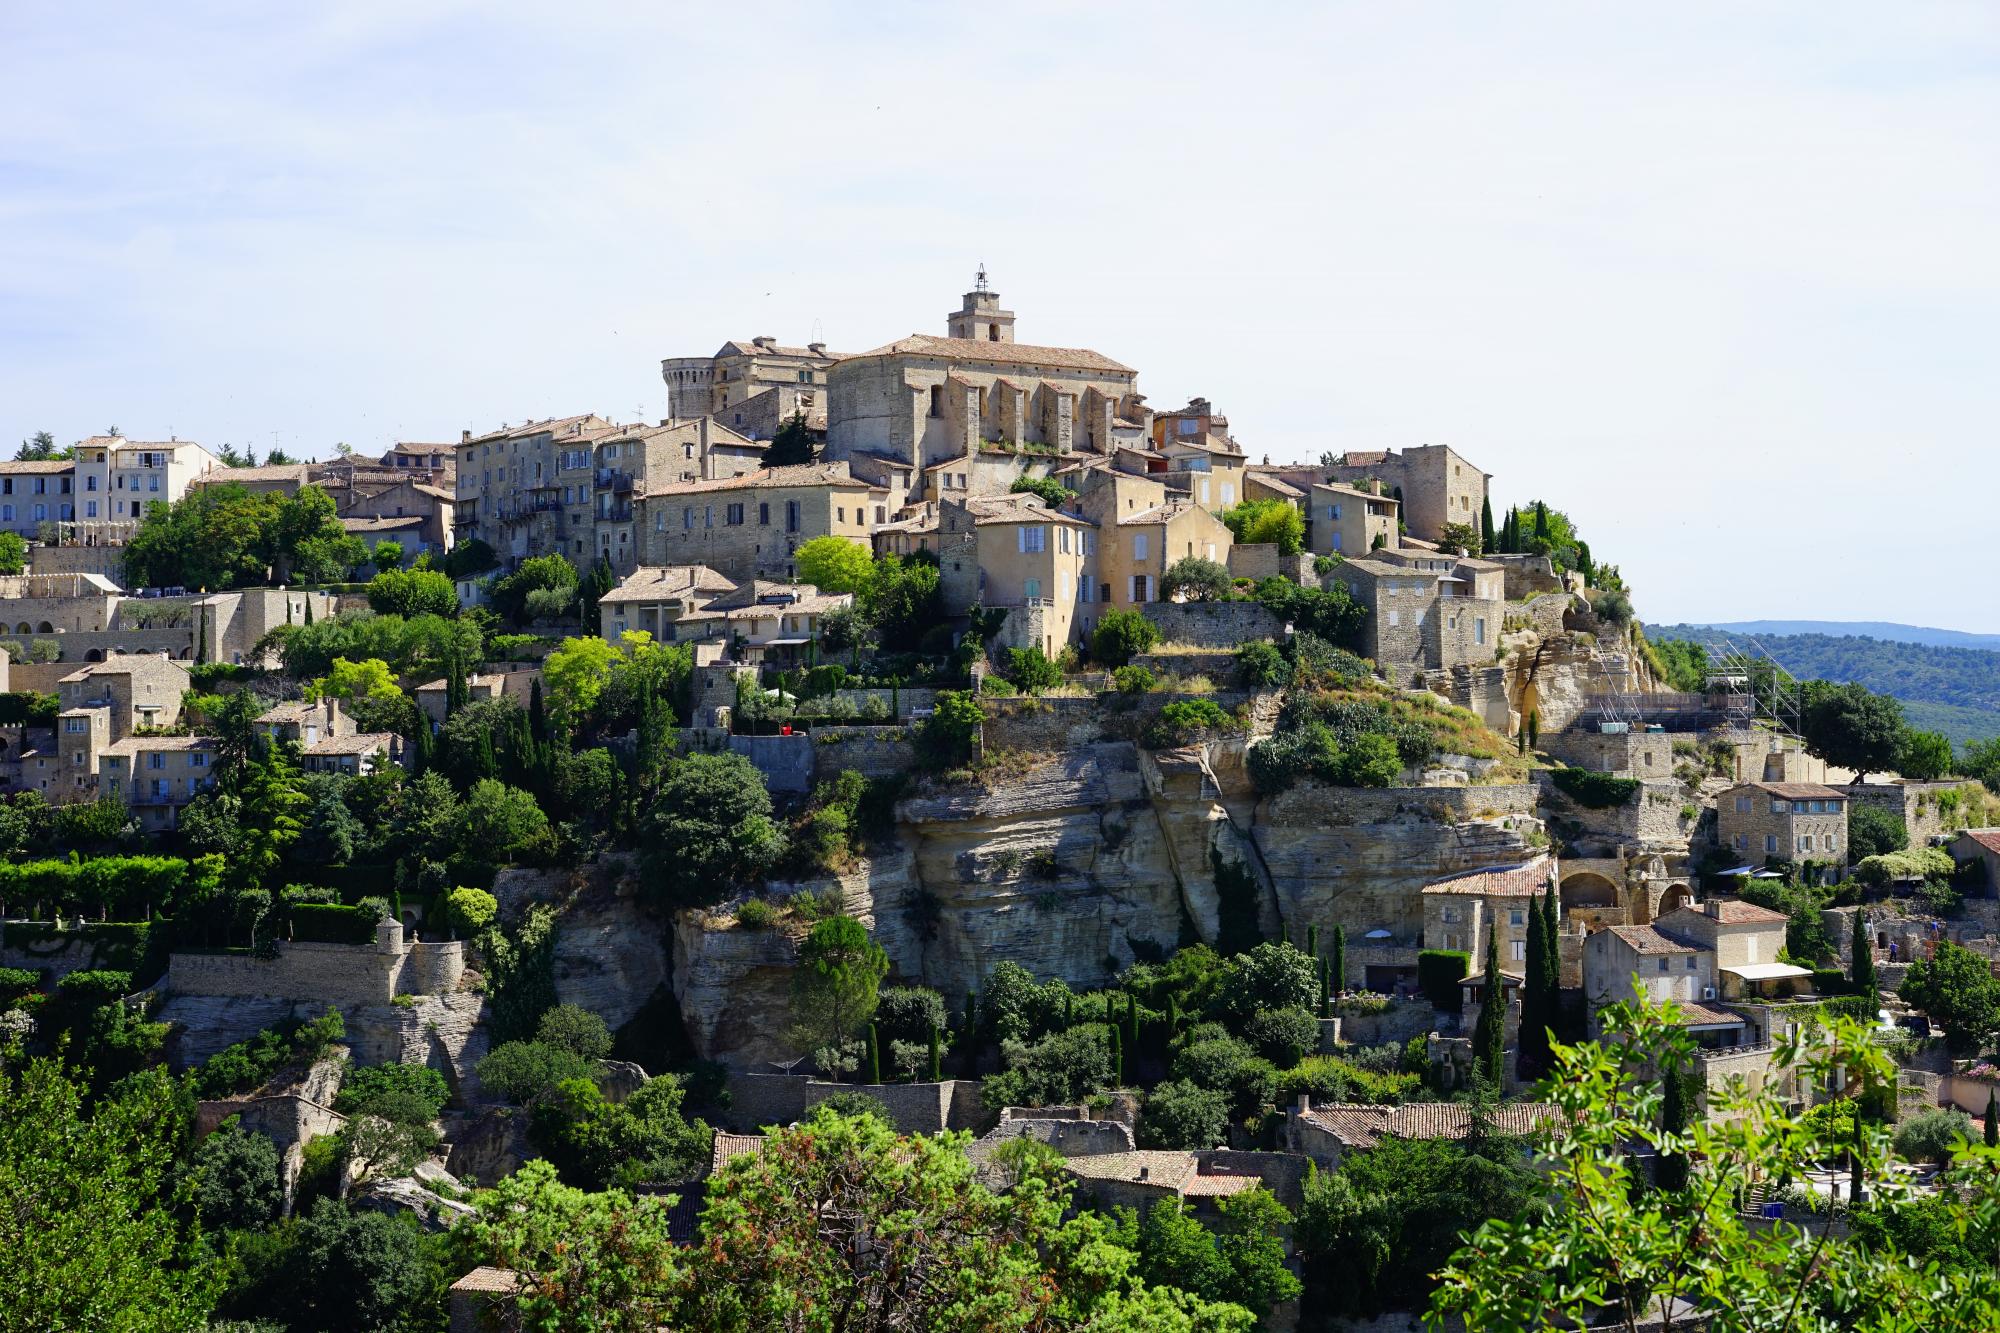 Discover Provence - Vacation package : The High Life  - Land of France, travel agency in France